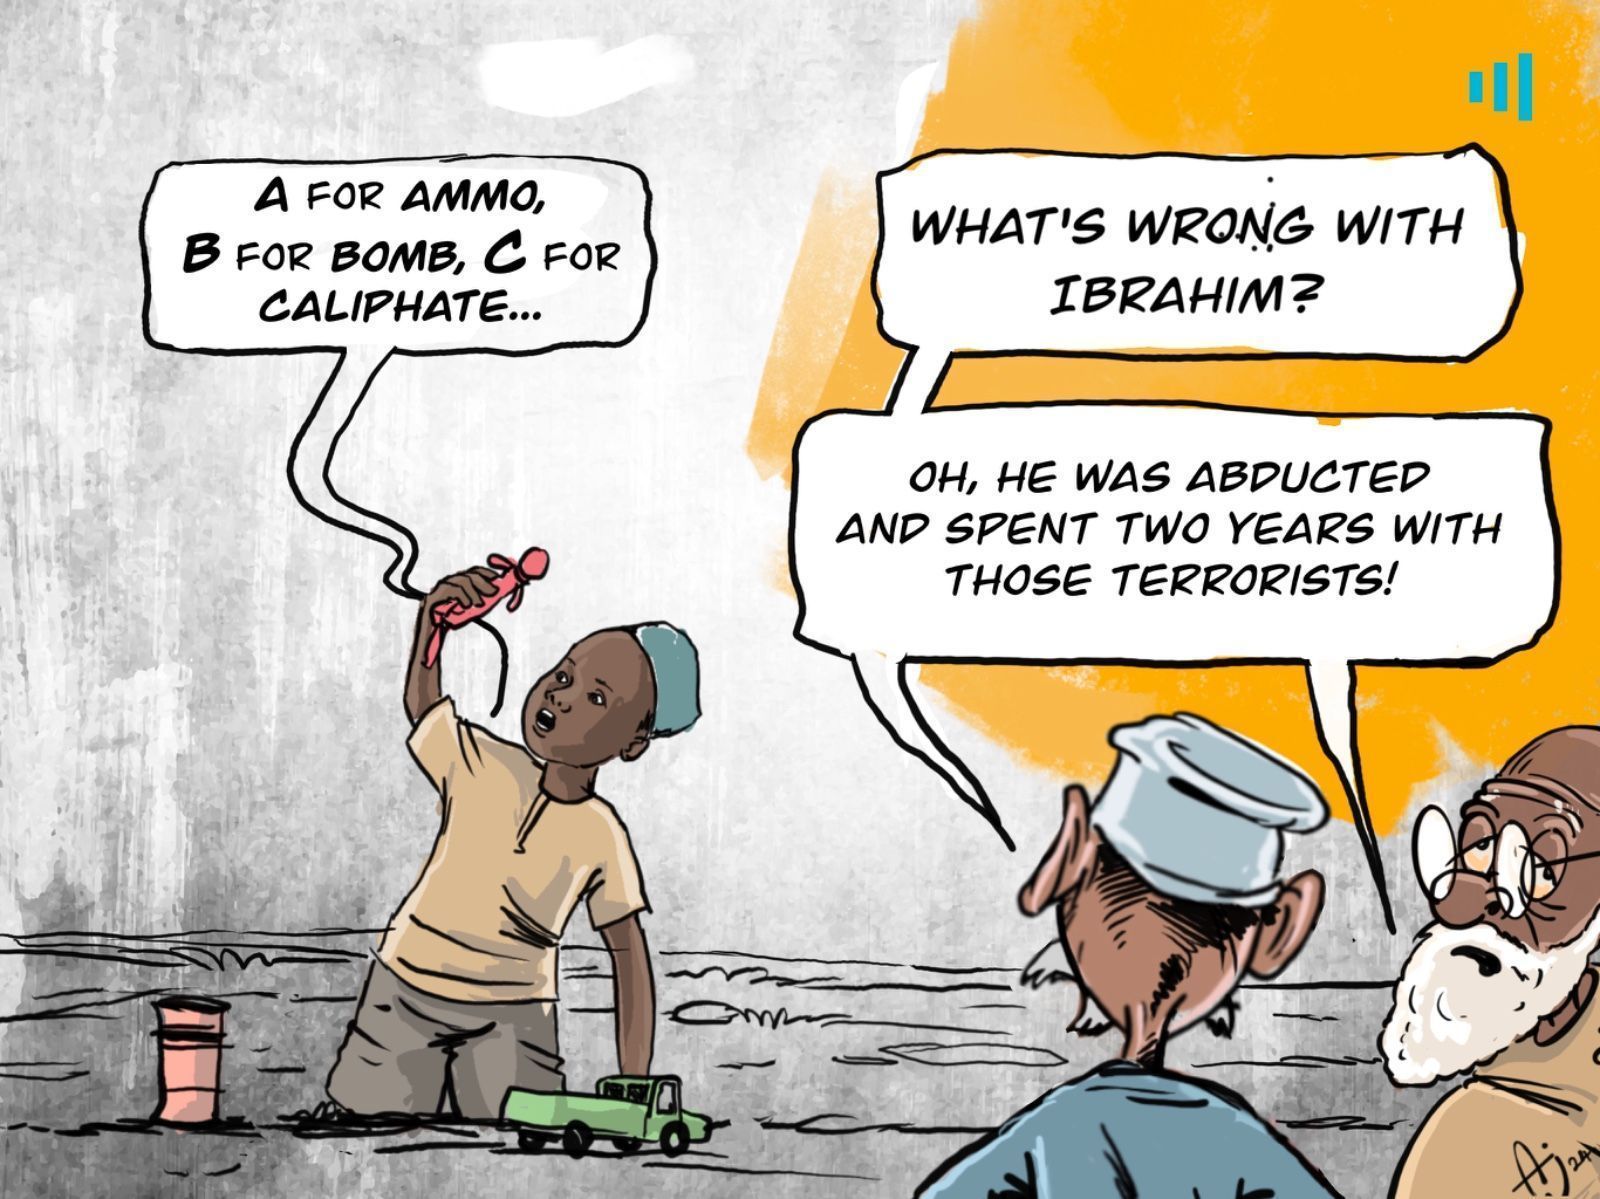 Illustration: A child plays with a toy, mimicking militant language, while adults discuss his past with terrorists.